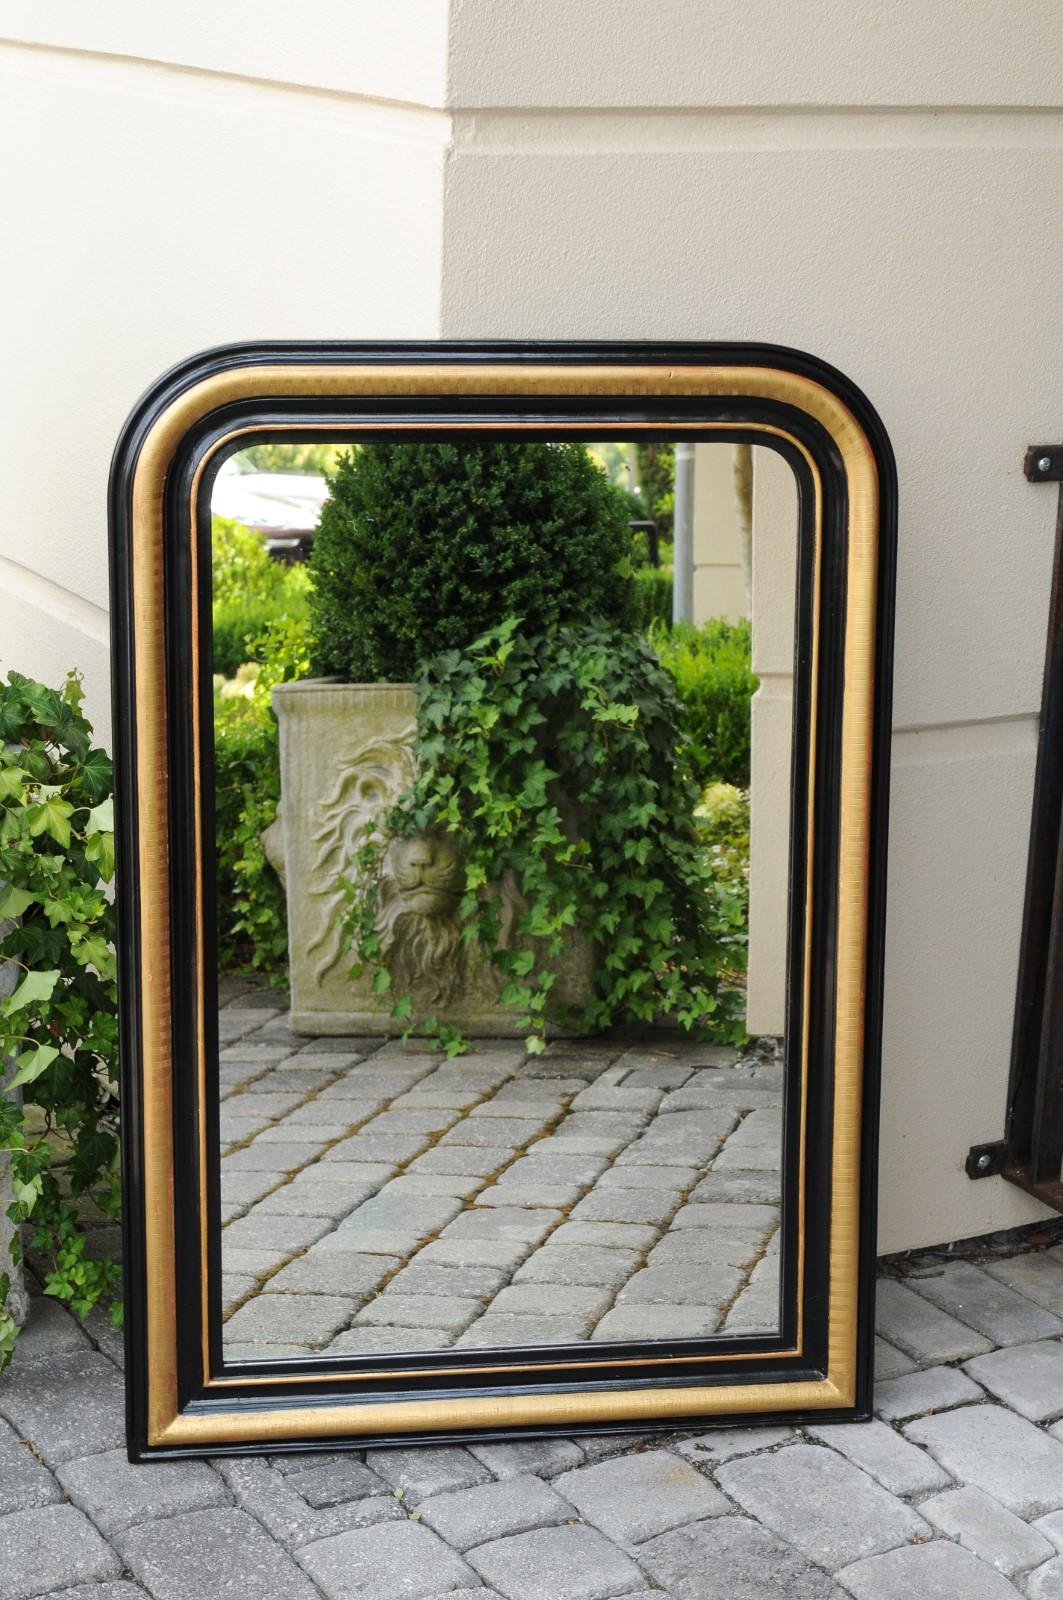 A French Louis-Philippe style wall mirror from the early 20th century, with gilded and ebonized accents. Born in France during the early years of the 20th century, this exquisite mirror presents the stylistic characteristics of the Louis-Philippe